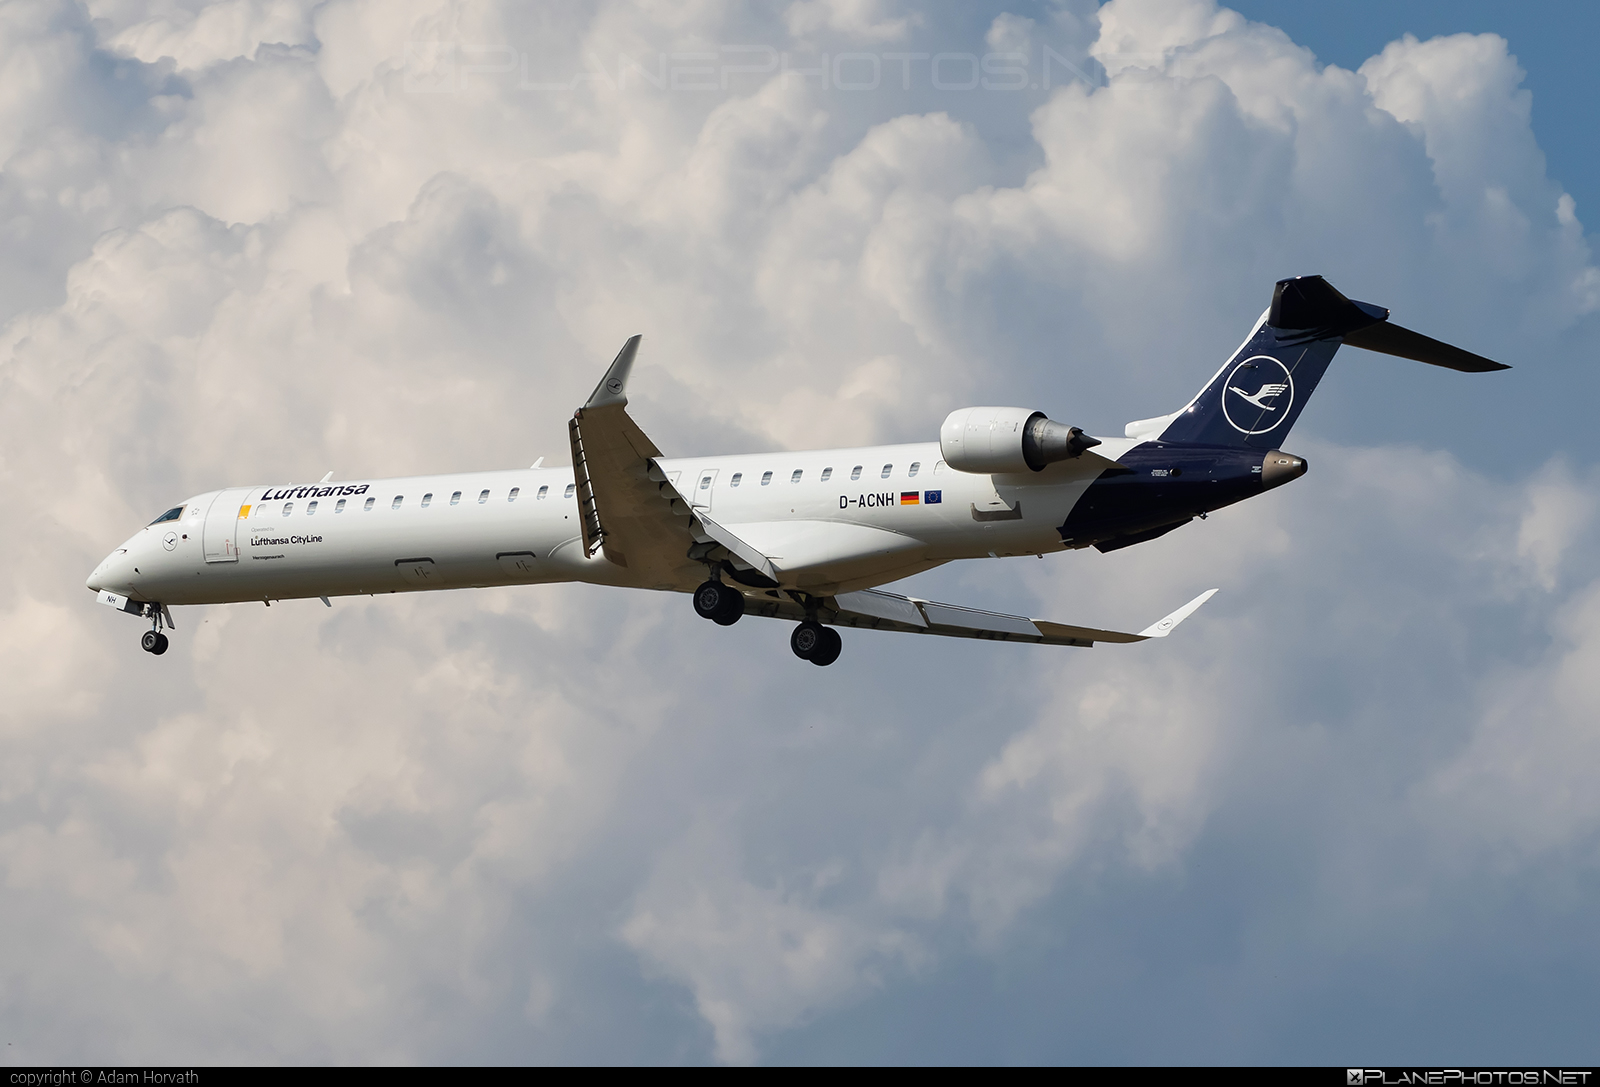 Bombardier CRJ900LR - D-ACNH operated by Lufthansa CityLine #bombardier #crj900 #crj900lr #lufthansa #lufthansacityline